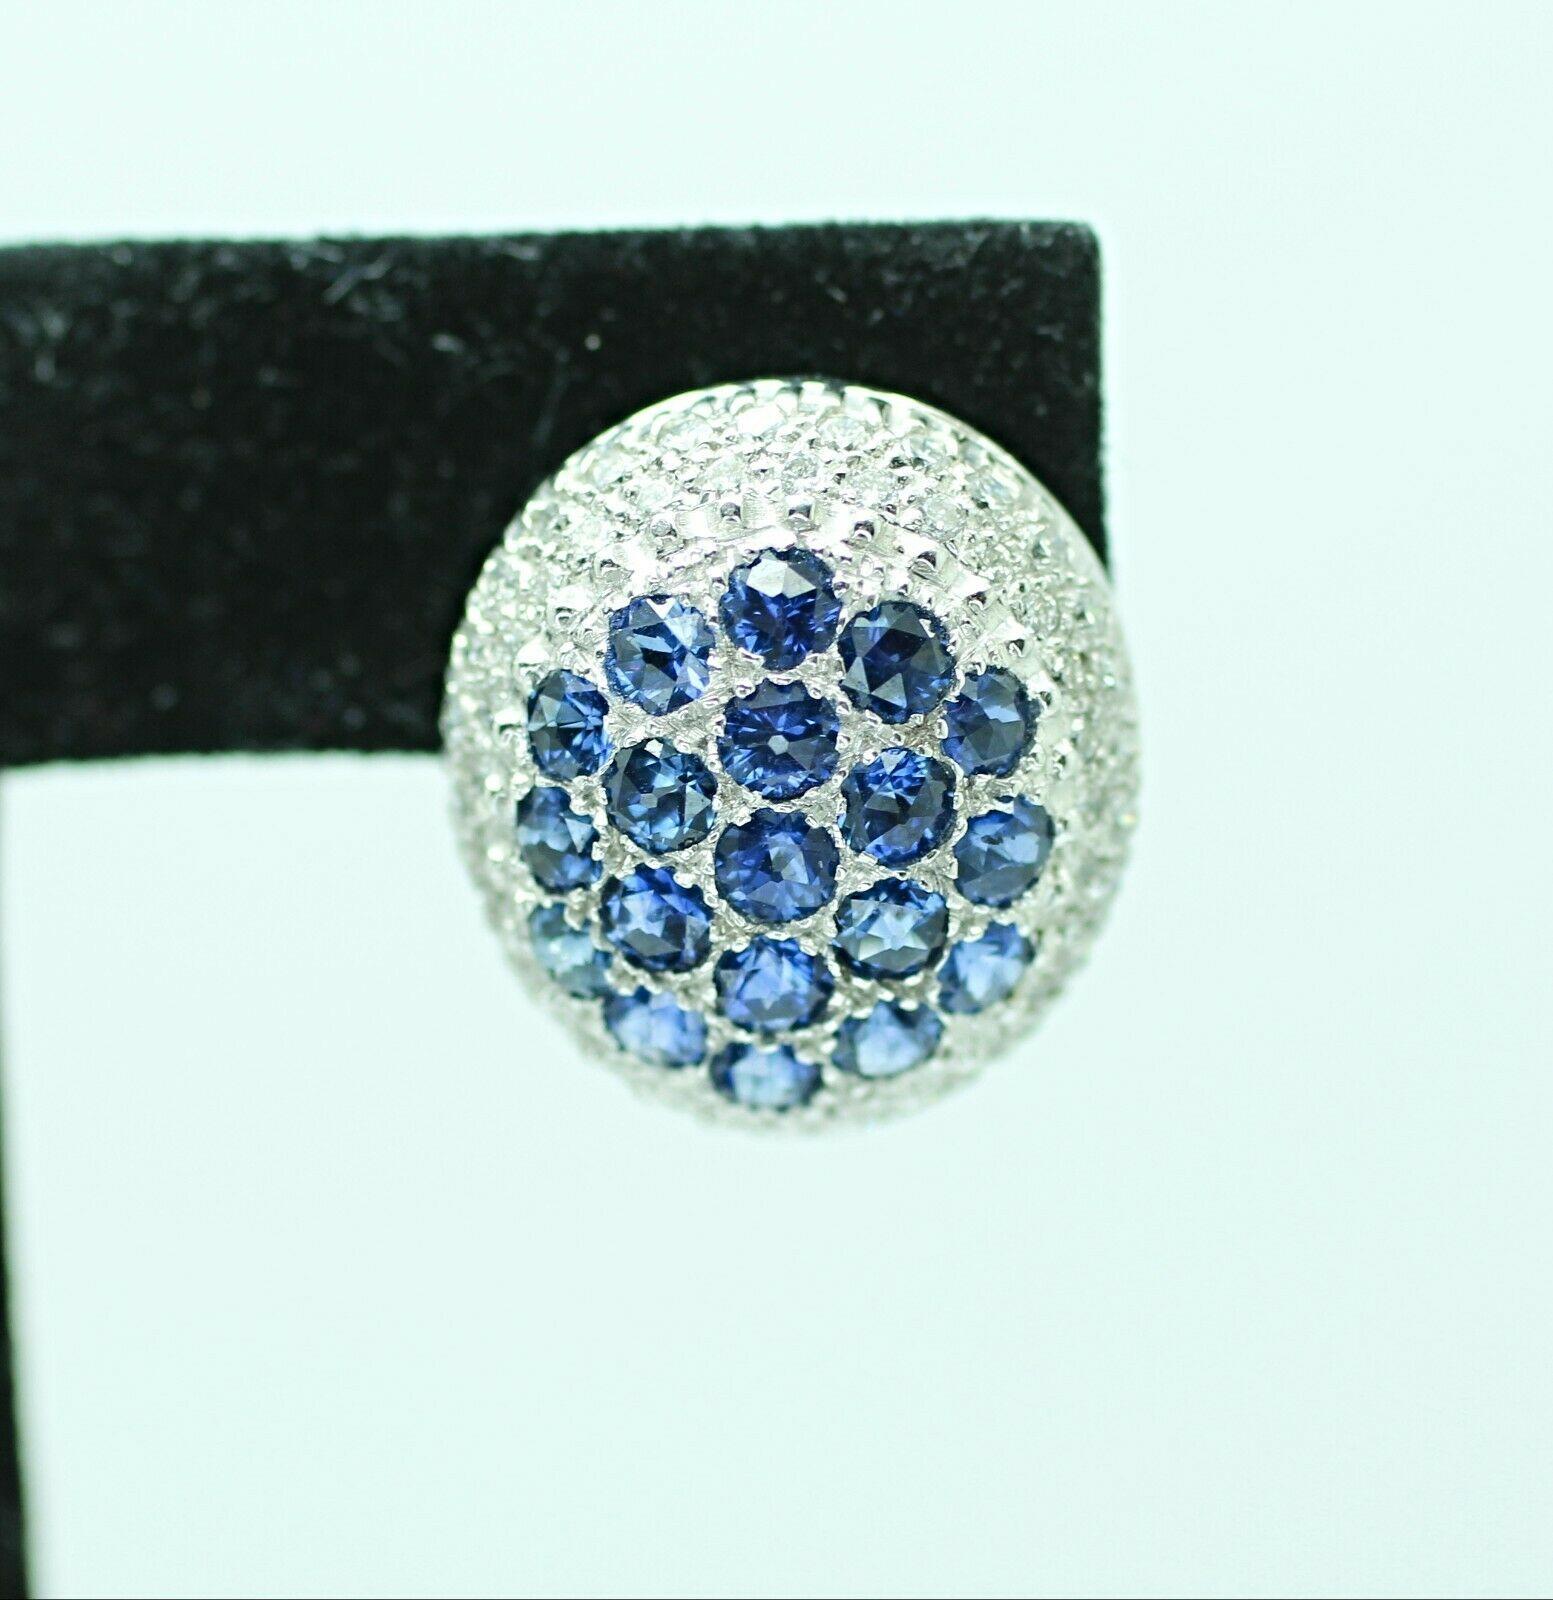  Specifications:
    main stone: 38 PCS BLUE SAPPHIRE APPRX 4.75CTW
    DIAMONDS: ROUND DIAMONDS APPRX 1.35CTW
    carat total weight: APPROX 5.1 CTW
    color: F-G/BLUE
    clarity:   SI1
    brand: NONE
    metal: 18K WHITE GOLD
    type: CLIP